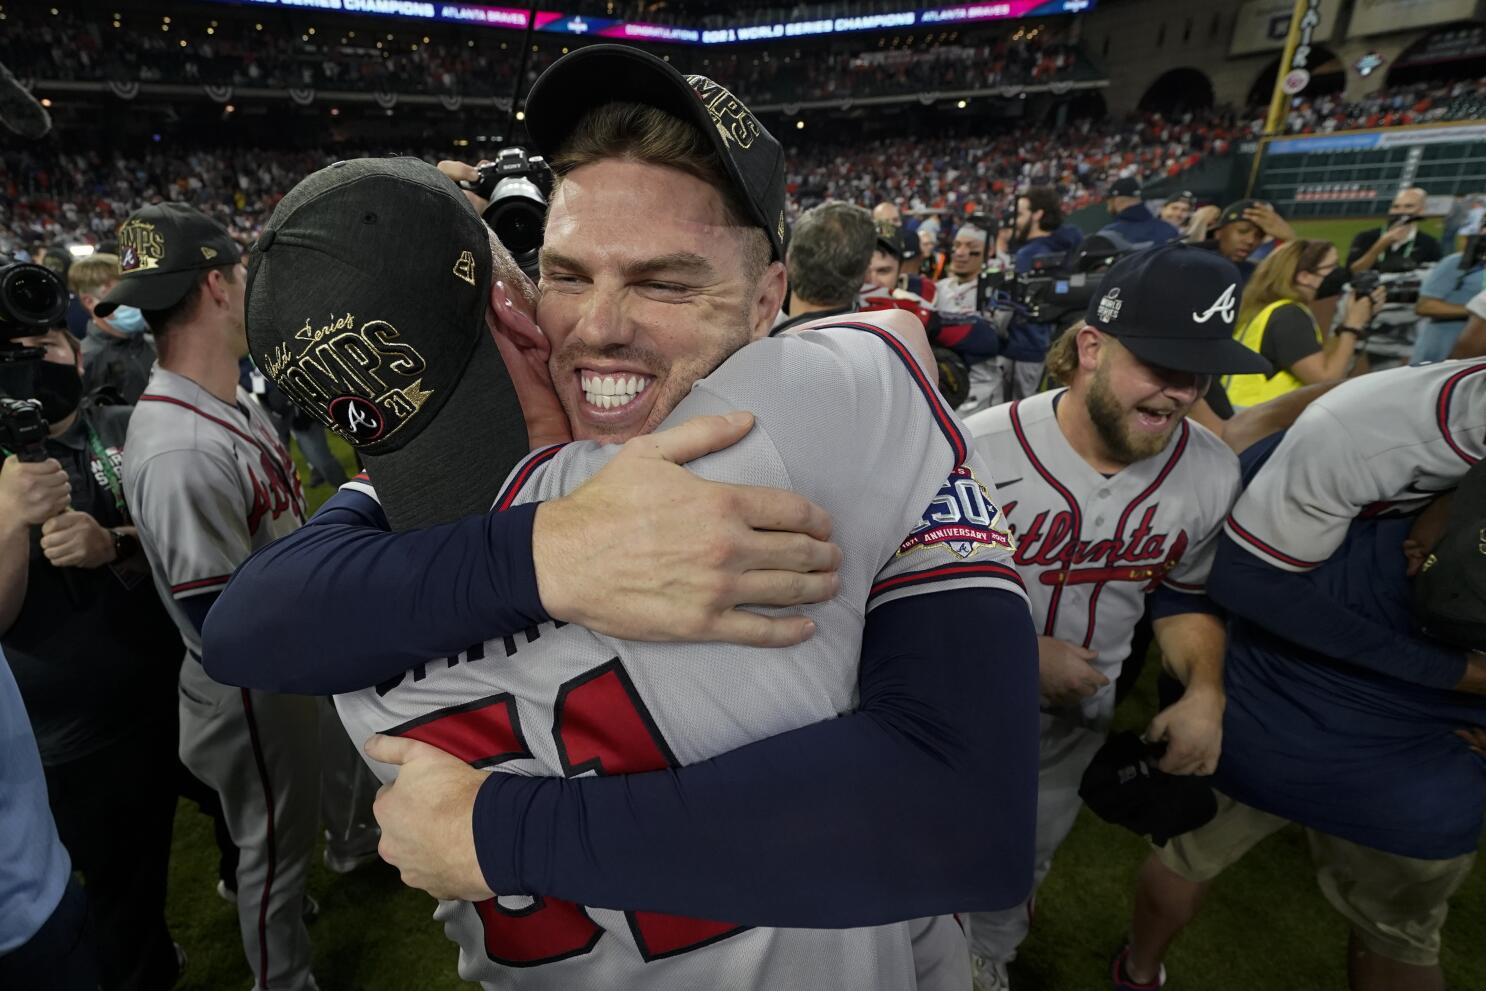 Freeman fittingly pockets last out for Braves in WS clincher - The